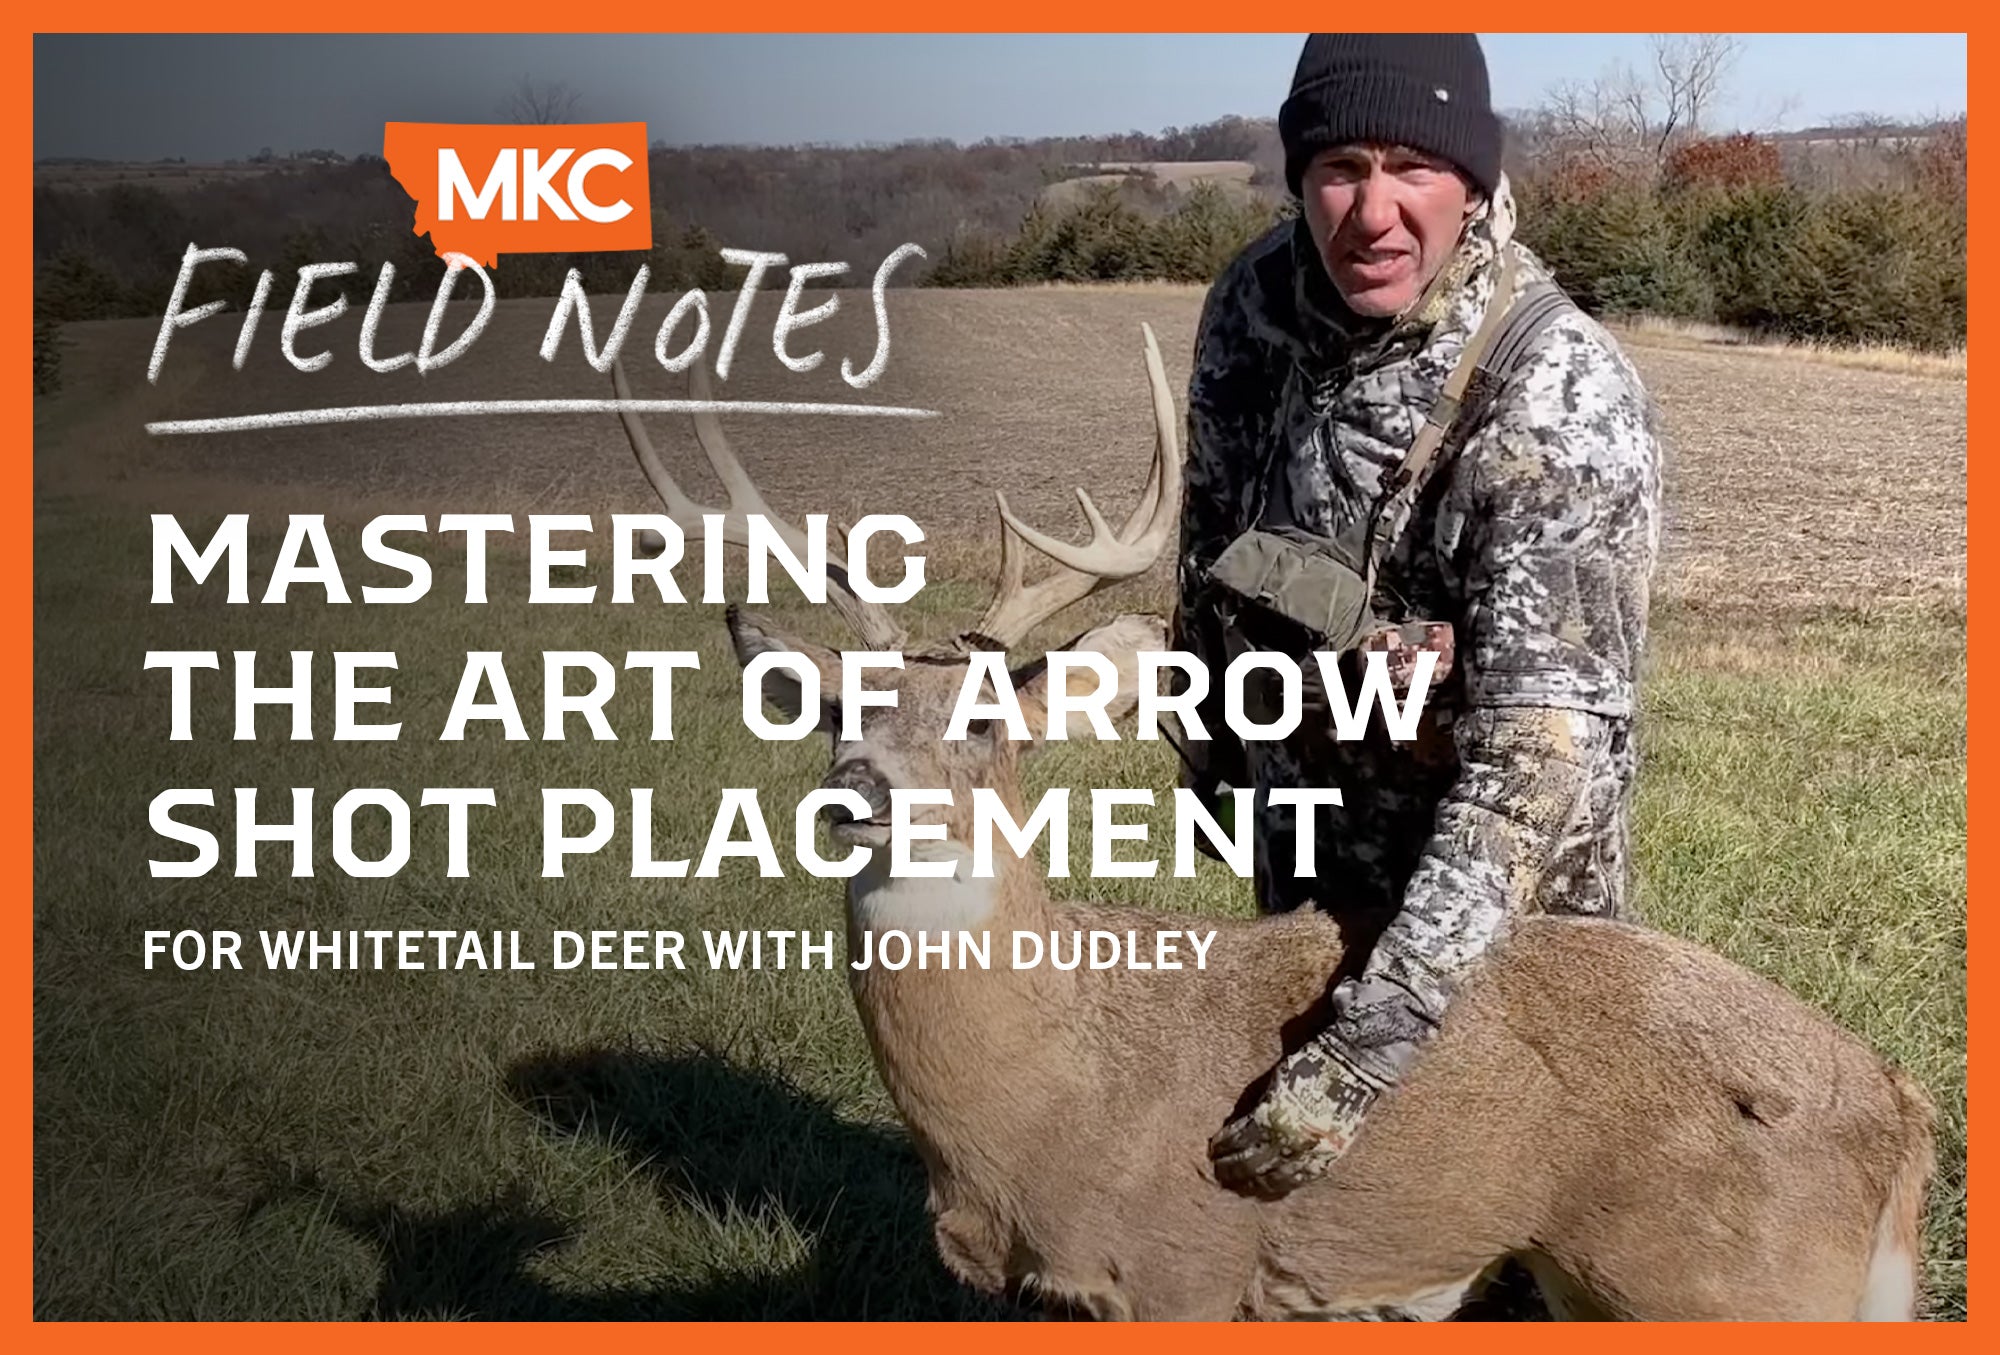 John Dudley demonstrates where to shoot a whitetail deer.